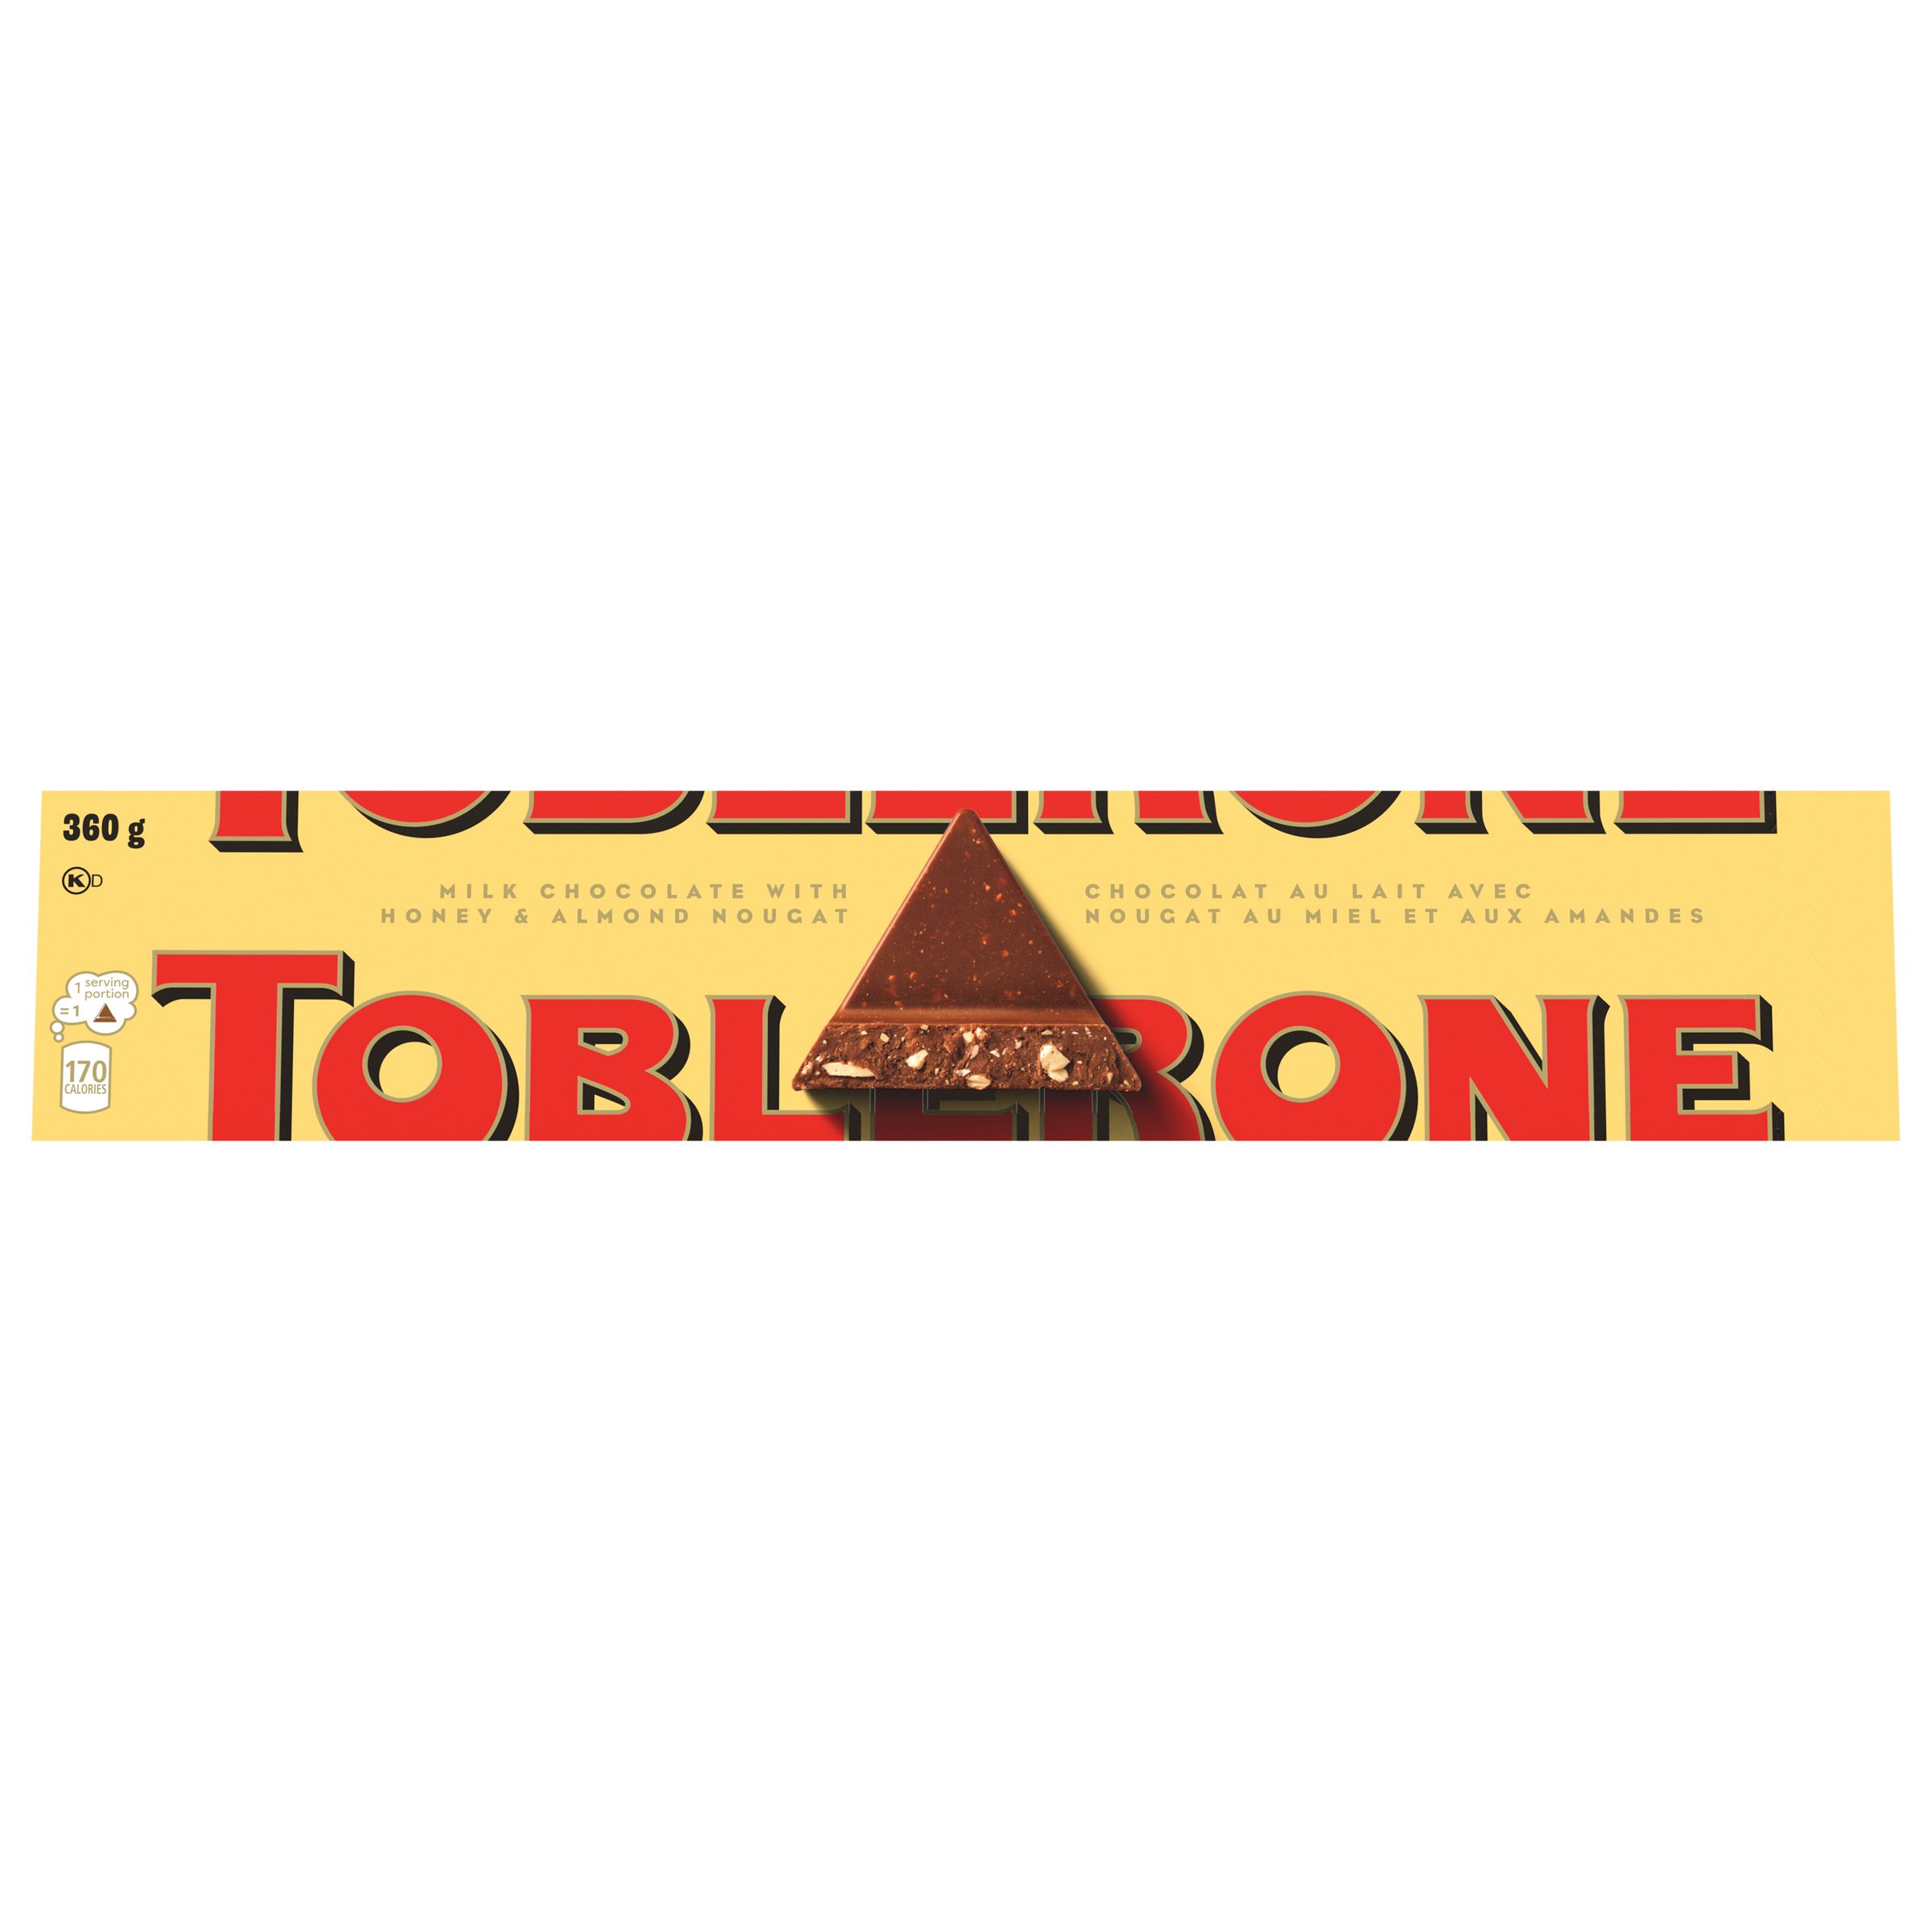 TOBLERONE Milk Chocolate with Honey and Almond Nougat Bar (360 g)